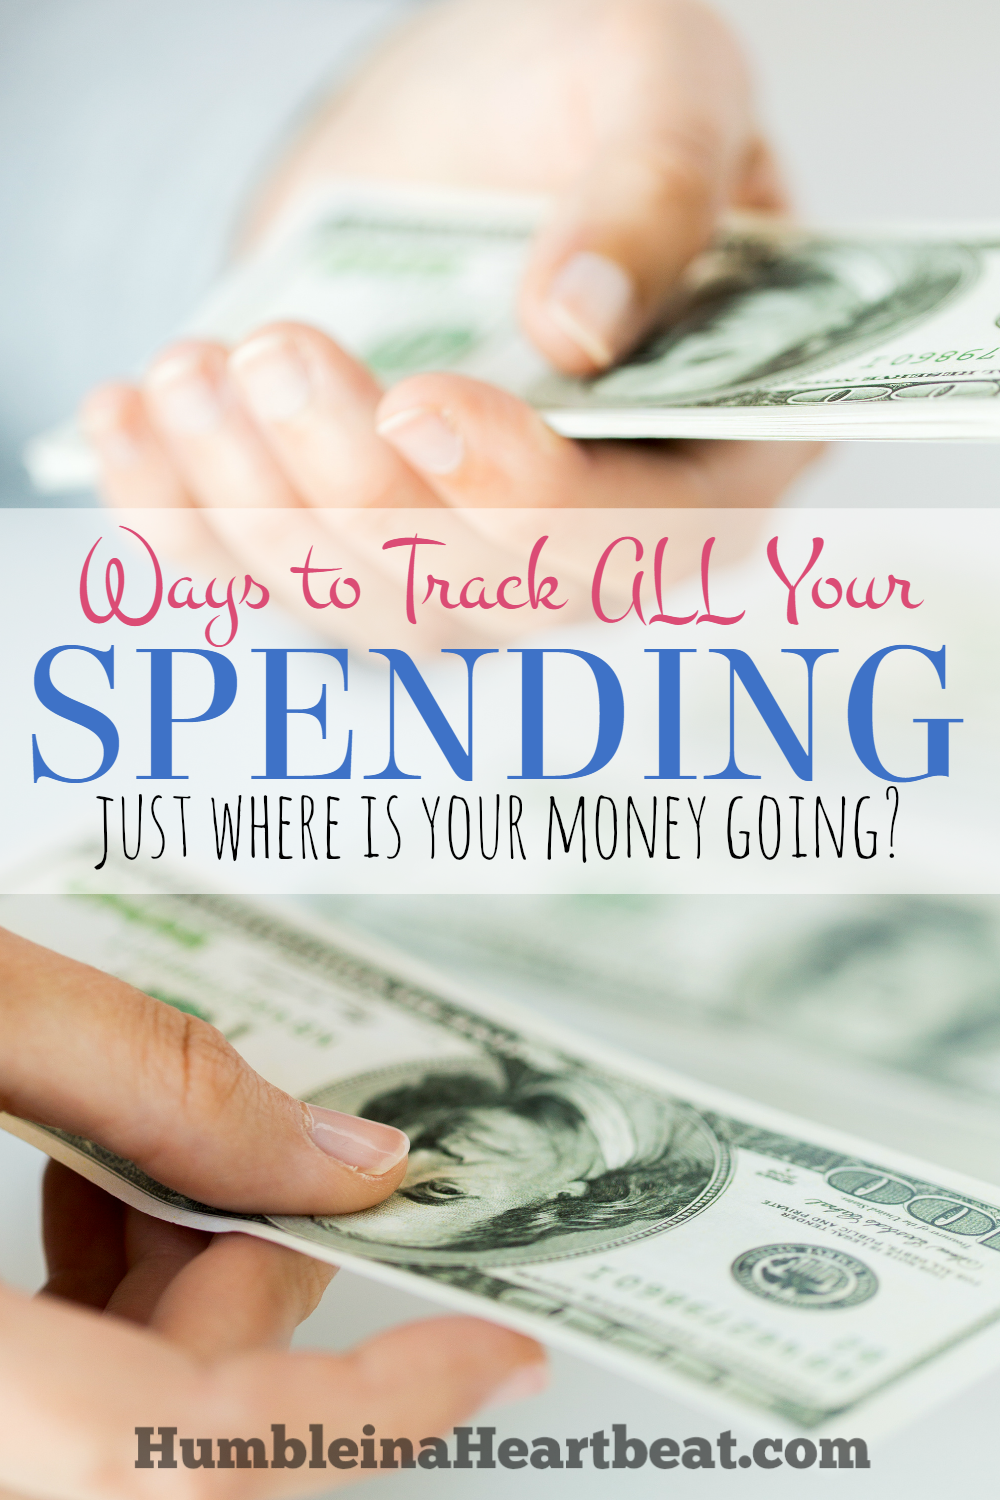 You can't budget unless you know what's going on with your money. All your spending should be tracked, and here are 4 simple ways to do that.